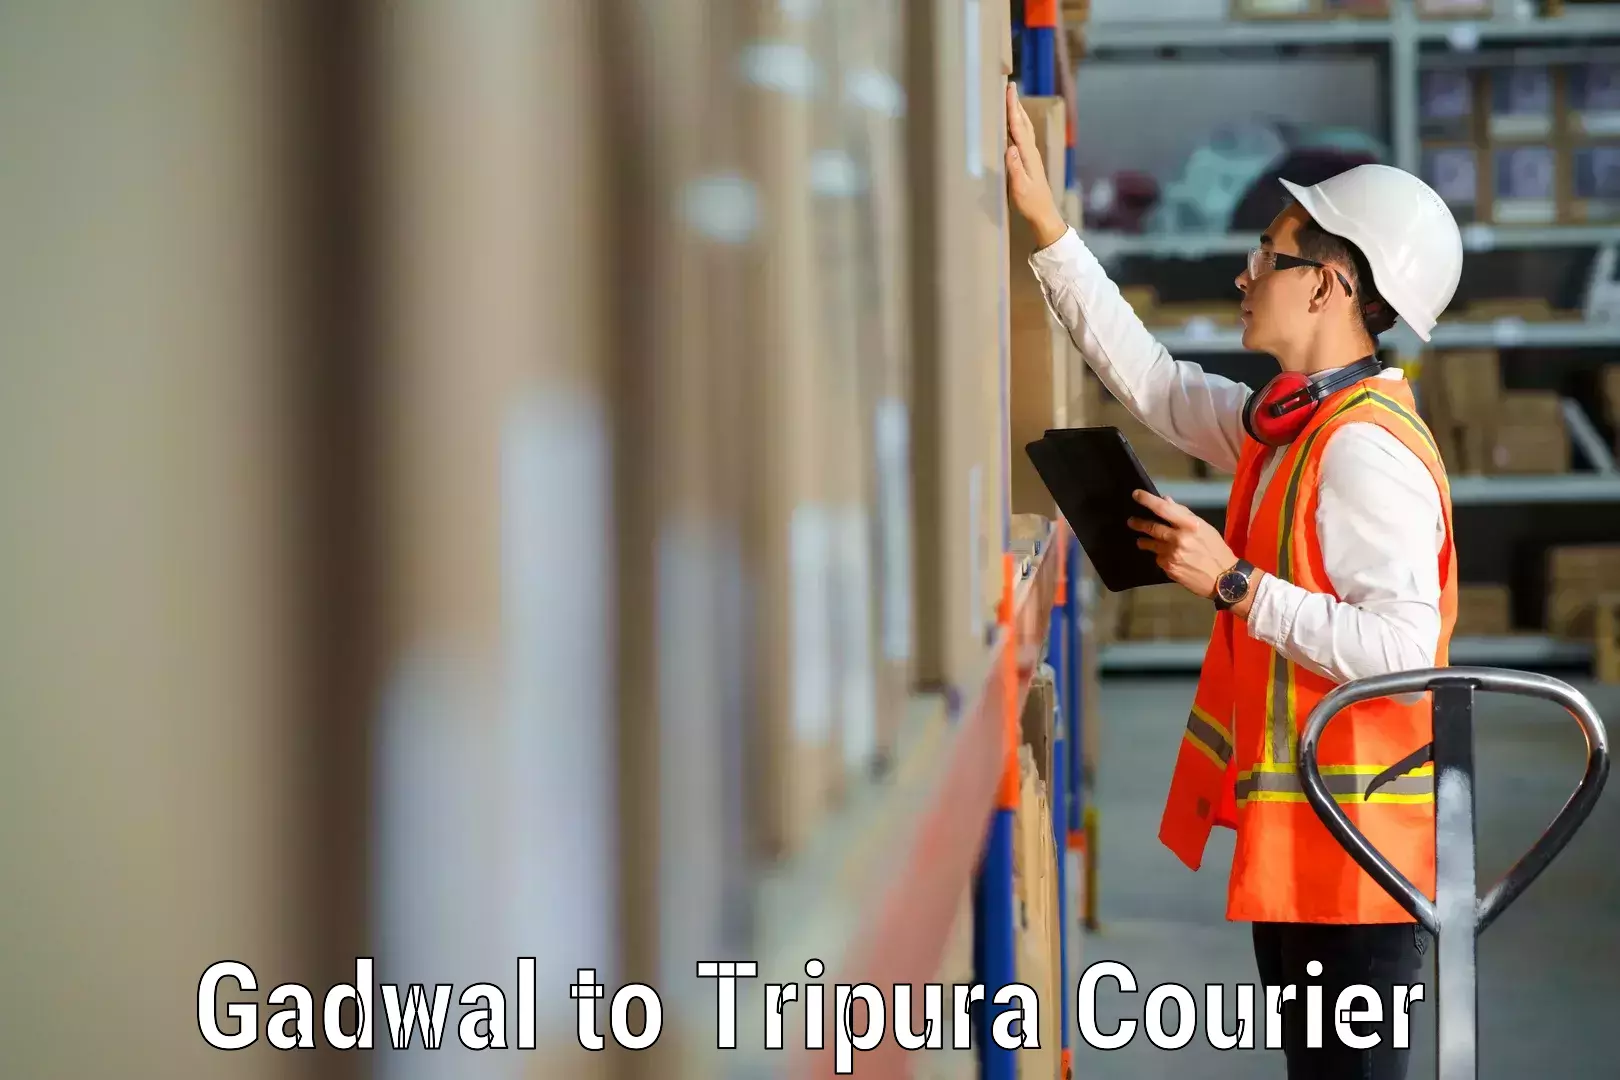 Furniture delivery service Gadwal to Tripura